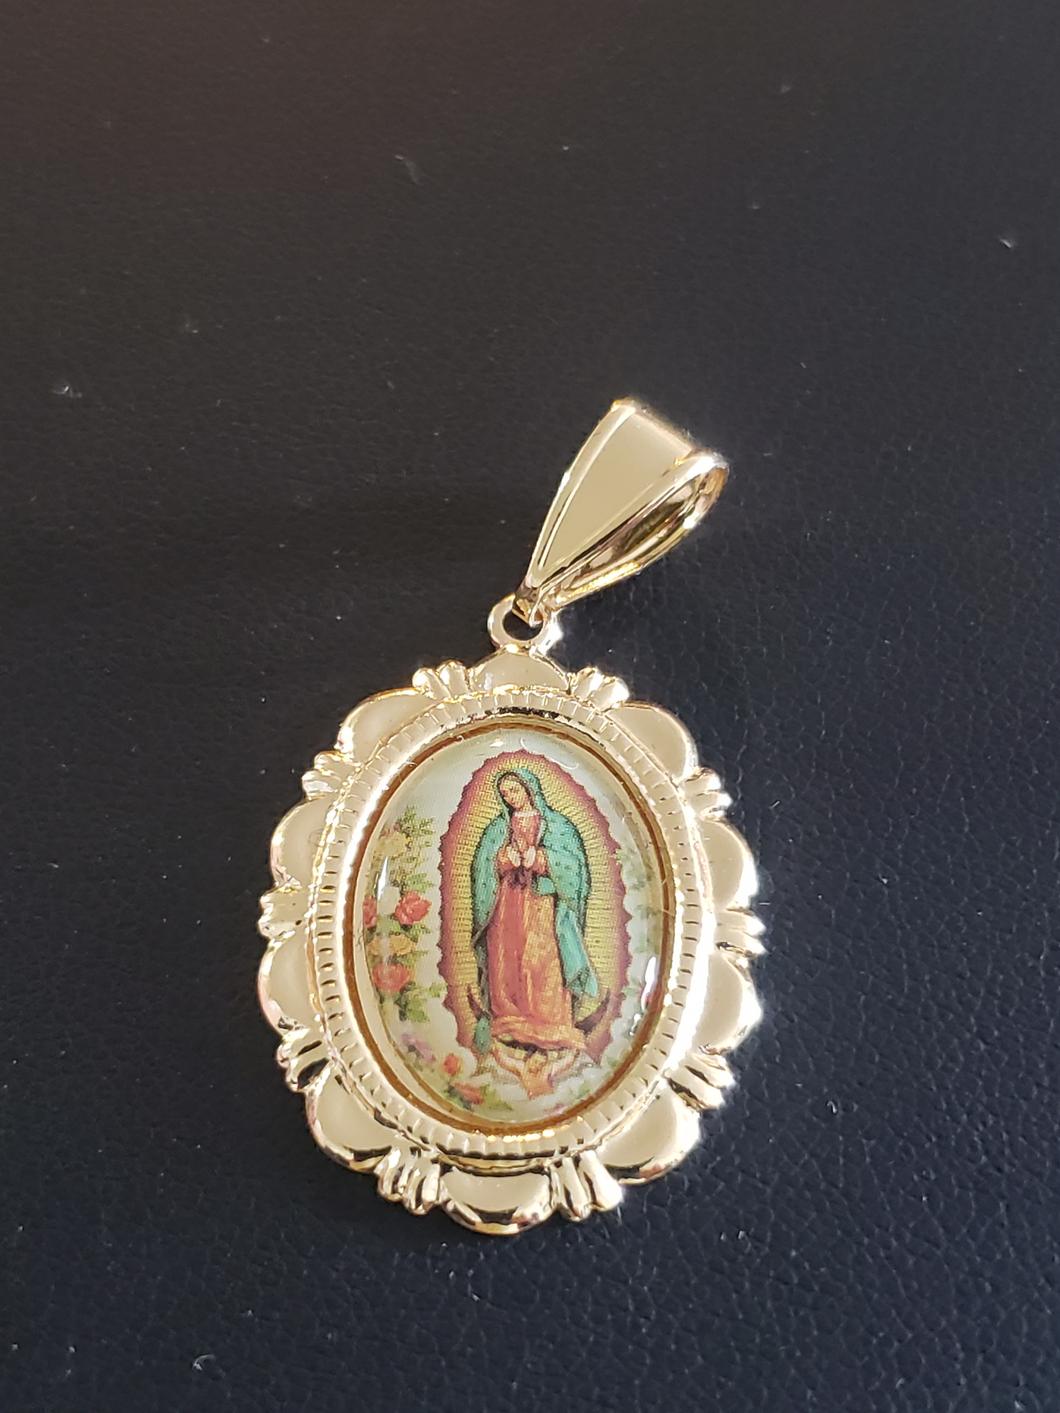 Our lady of guadalupe (Rosa de Guadalupe)